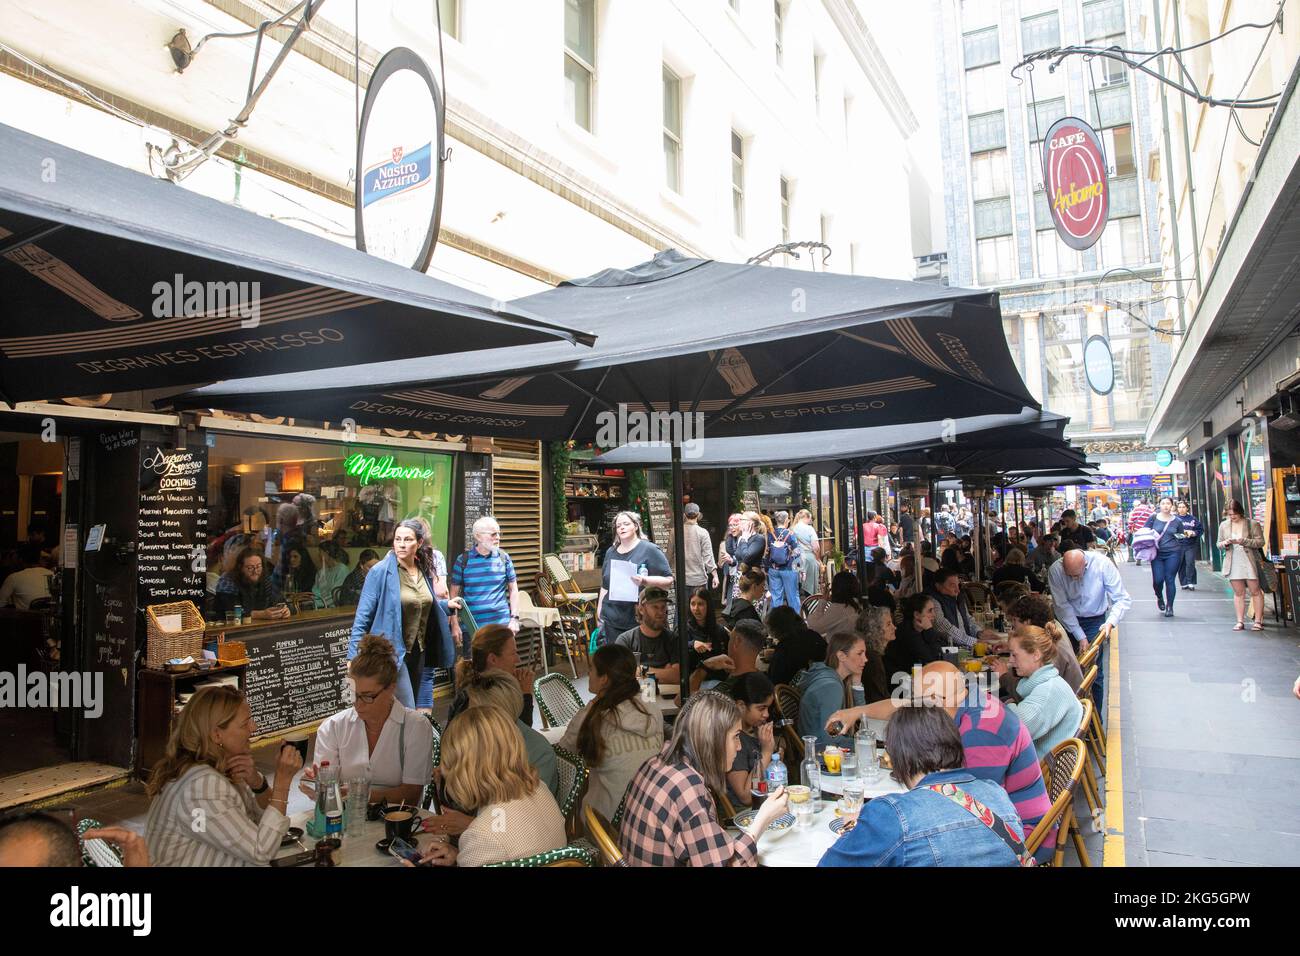 Melbourne laneways, cafe restaurants and diners eat lunch in degraves street Melbourne CBD,Victoria,Australia Stock Photo